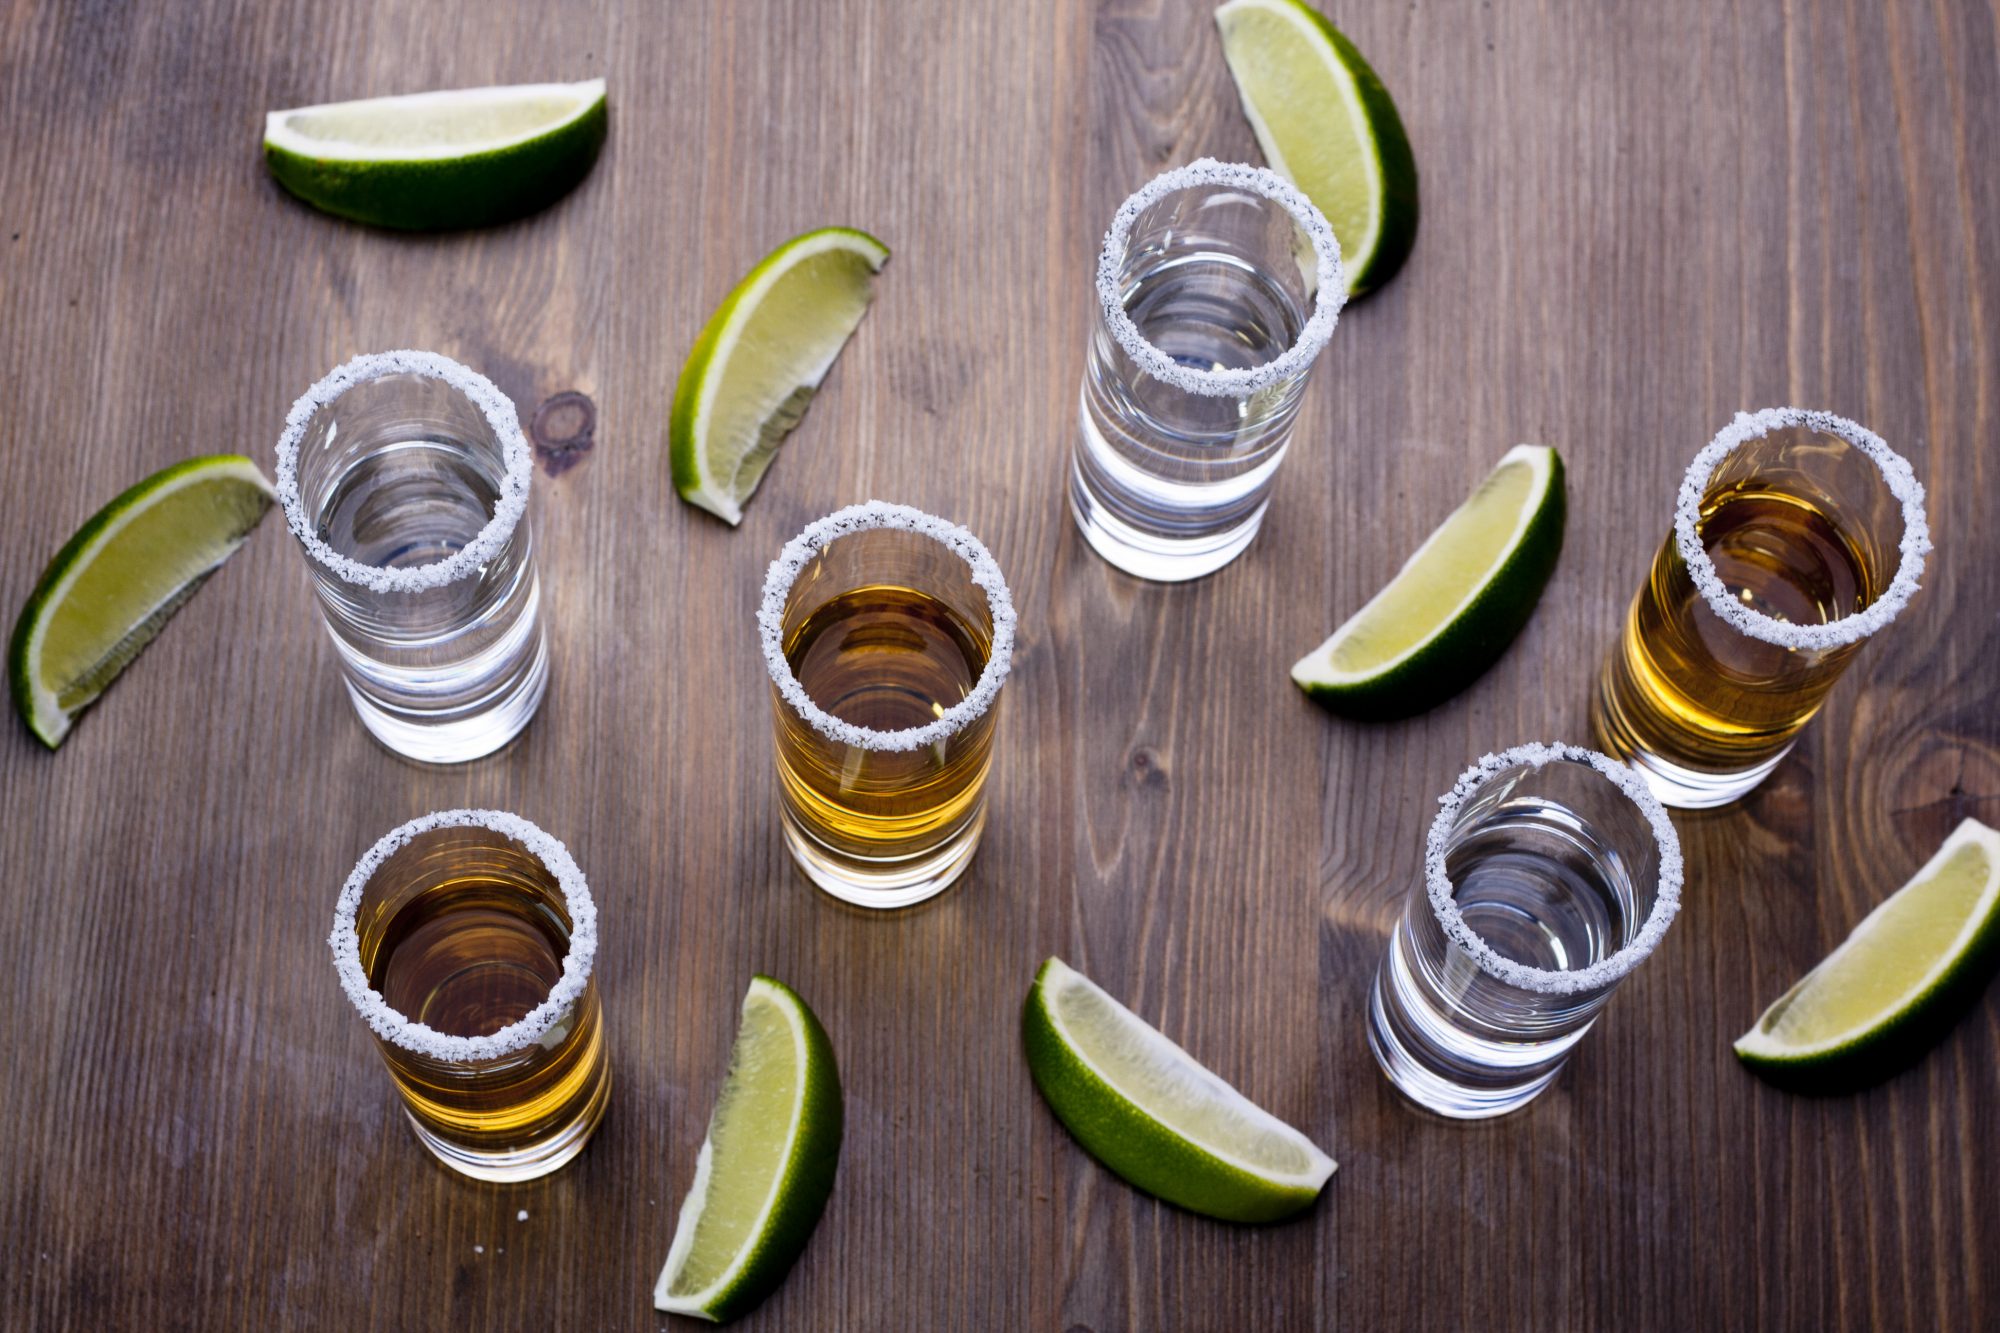 getty-tequila-shots-image